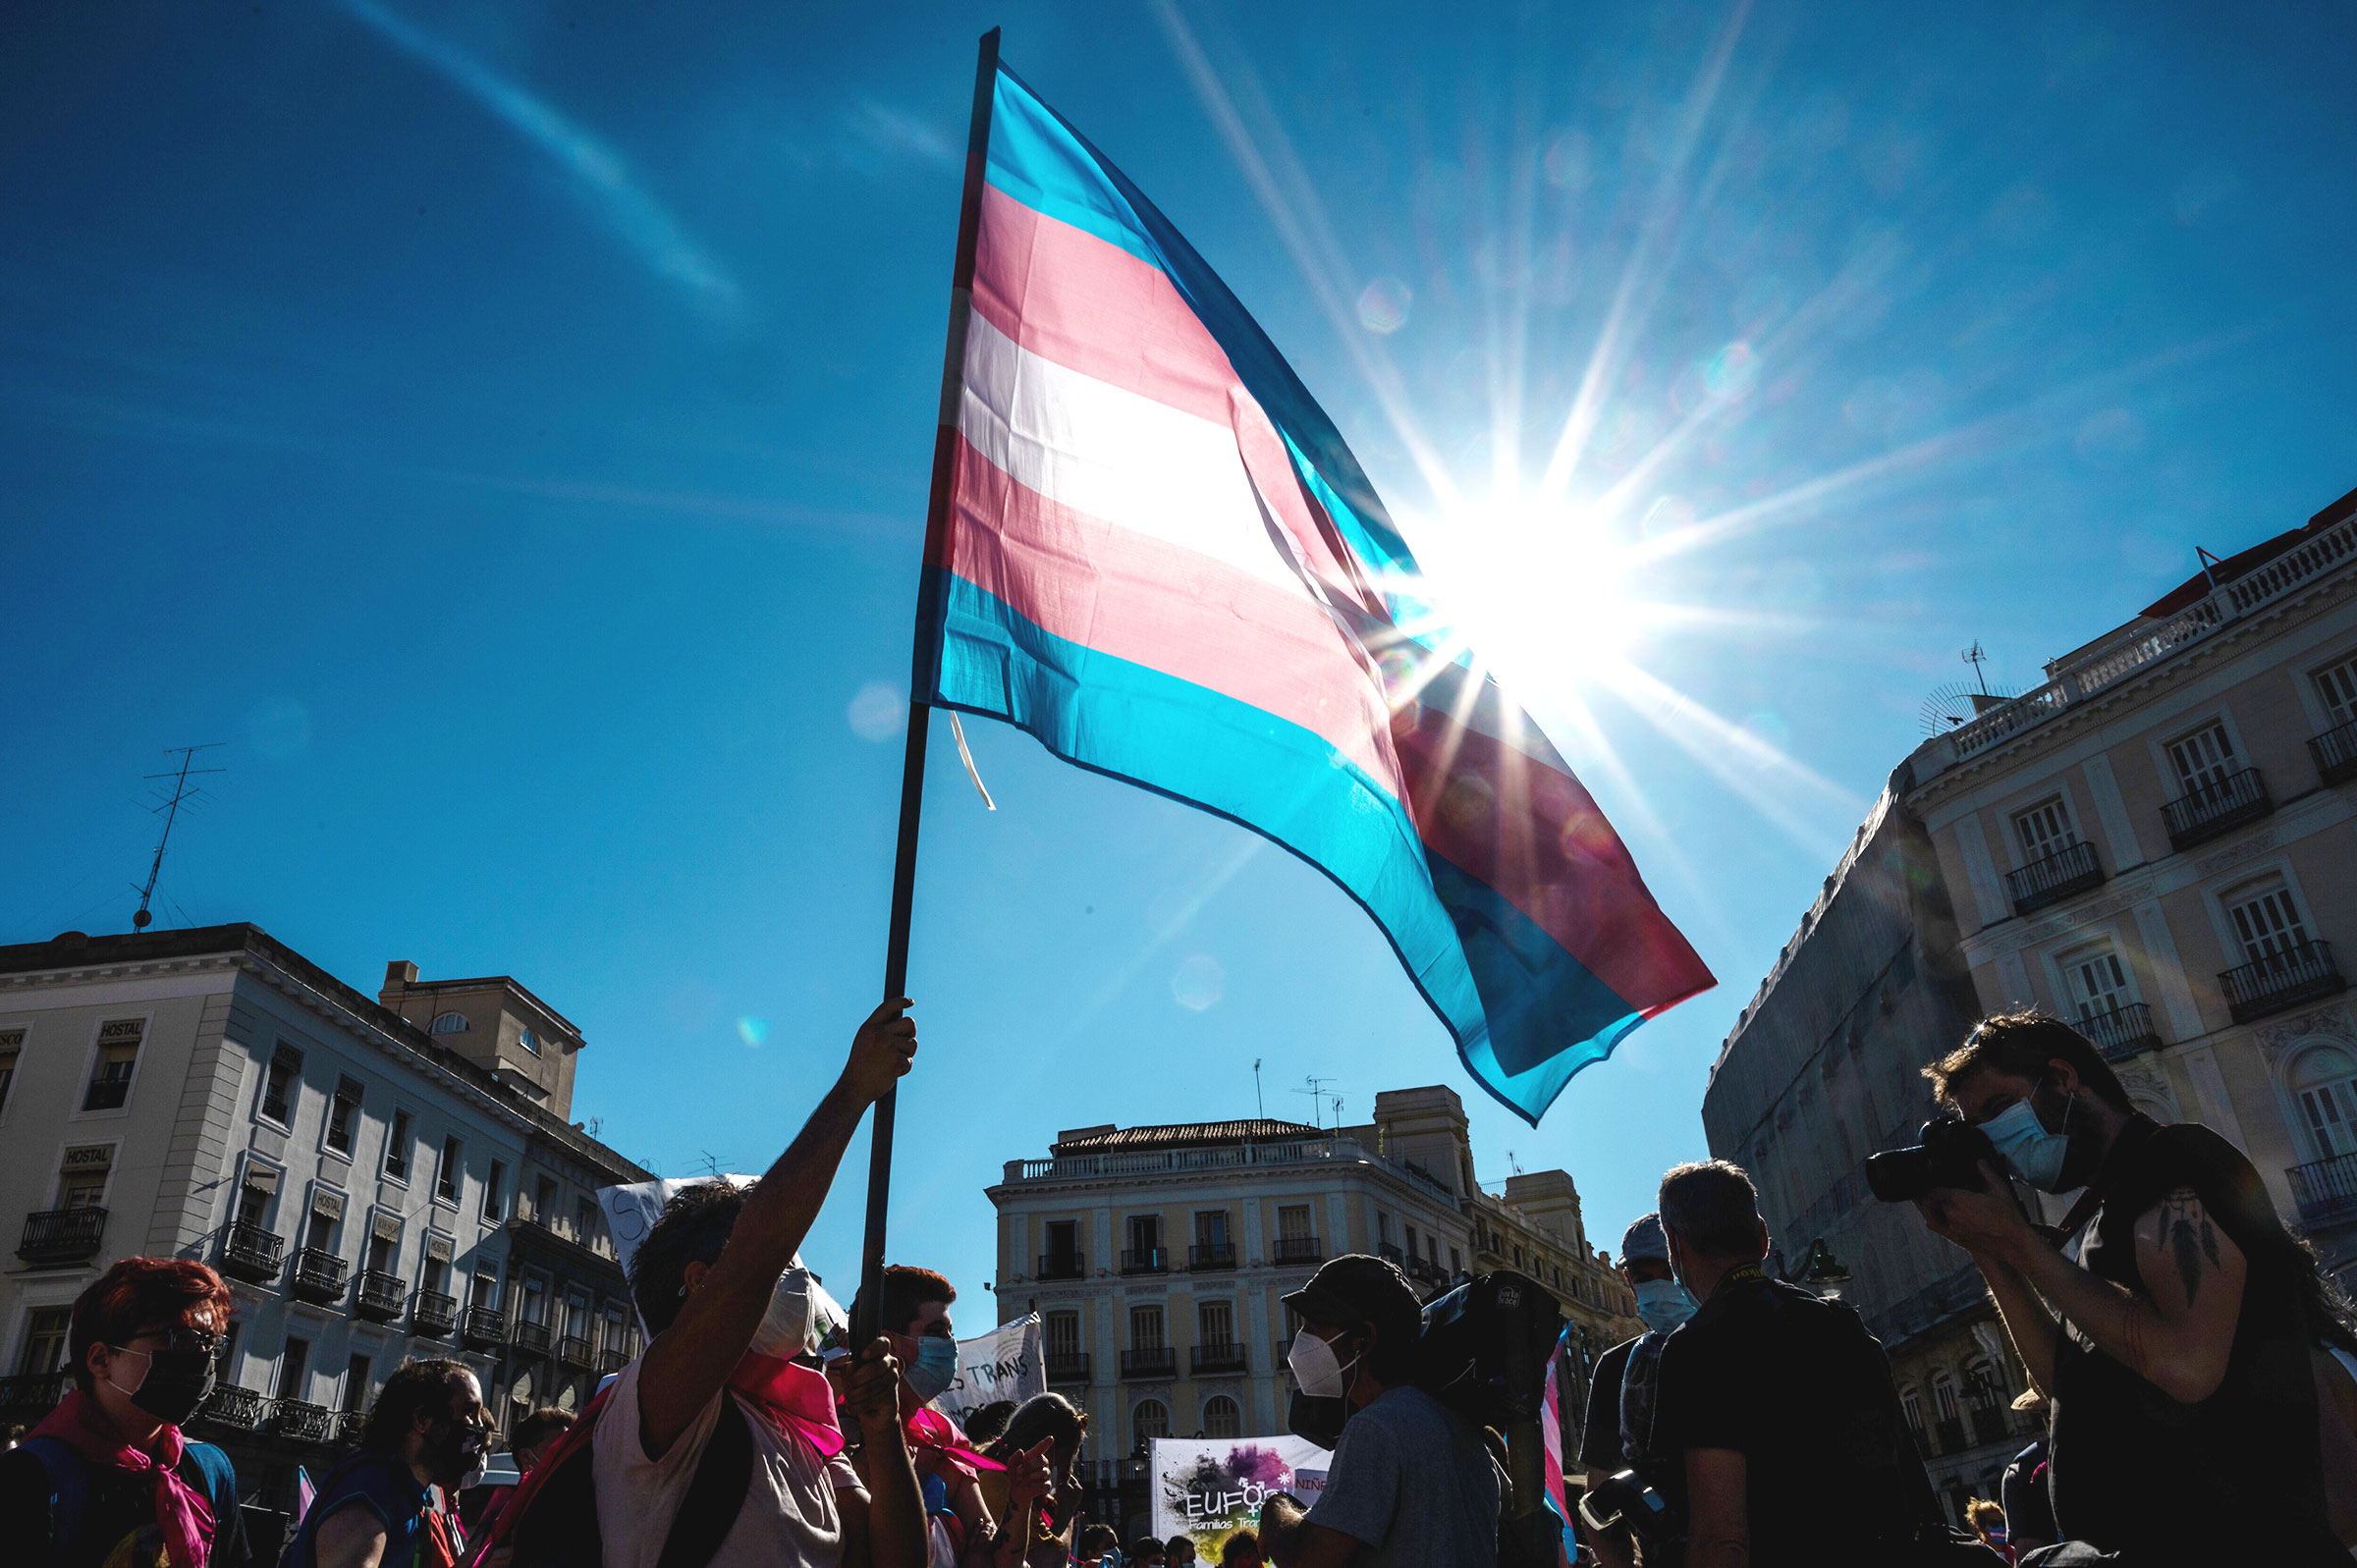 A person waves a trans flag in the sky during an outdoor protest